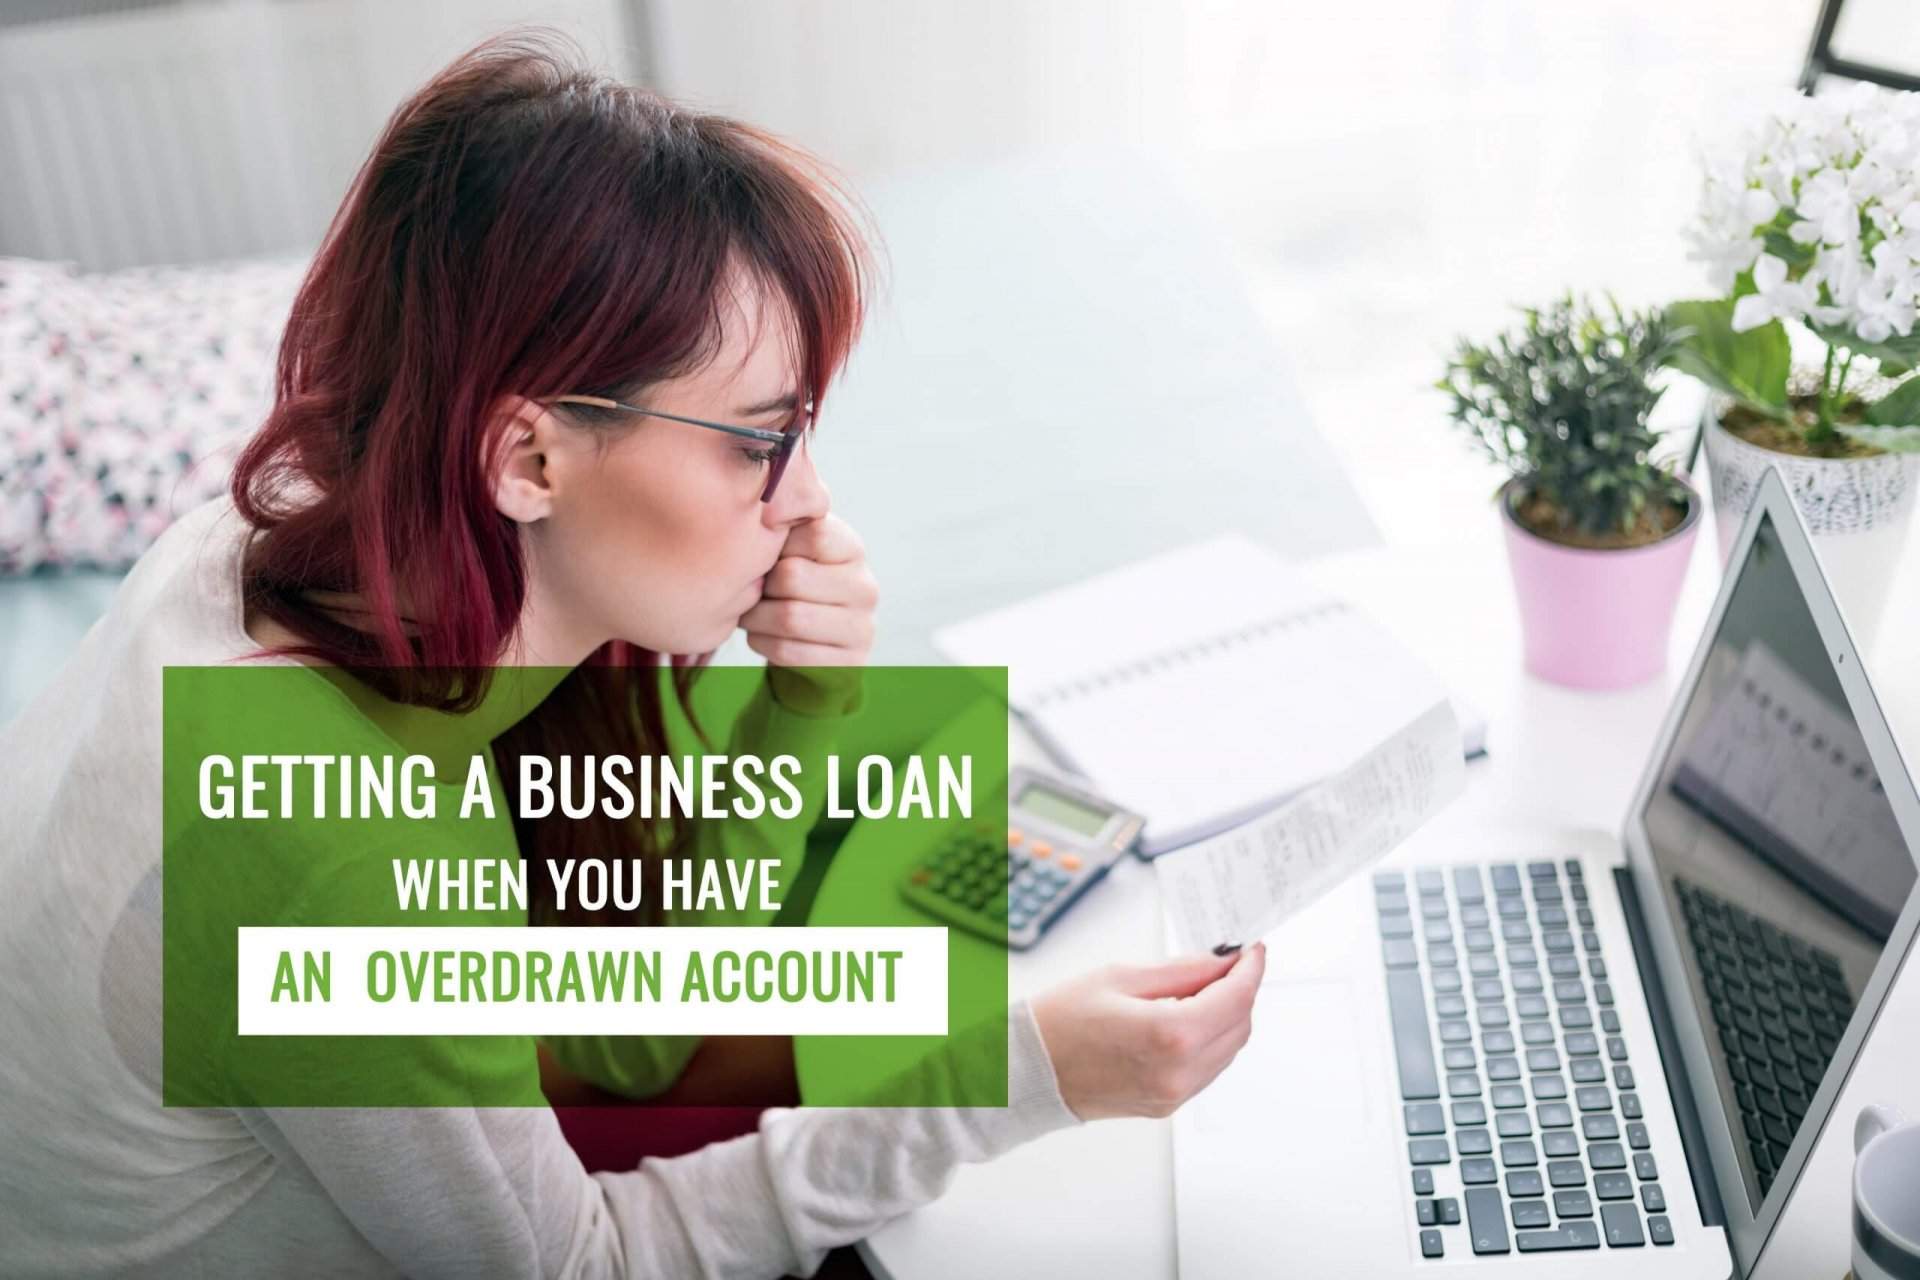 Getting A Business Loan When You Have An Overdrawn Account